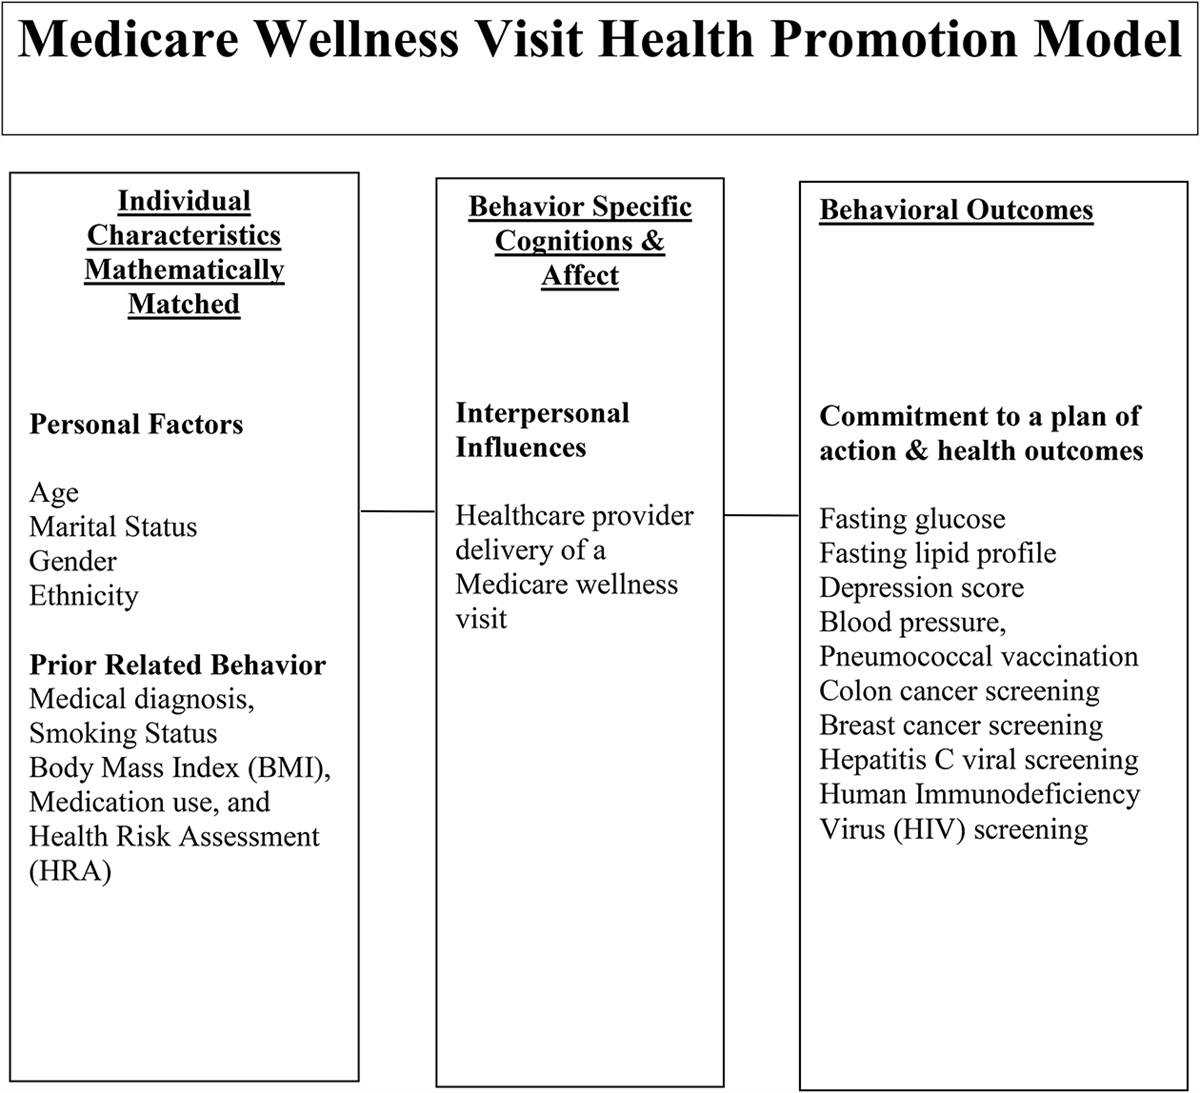 Effects of Medicare wellness visits on health promotion outcomes